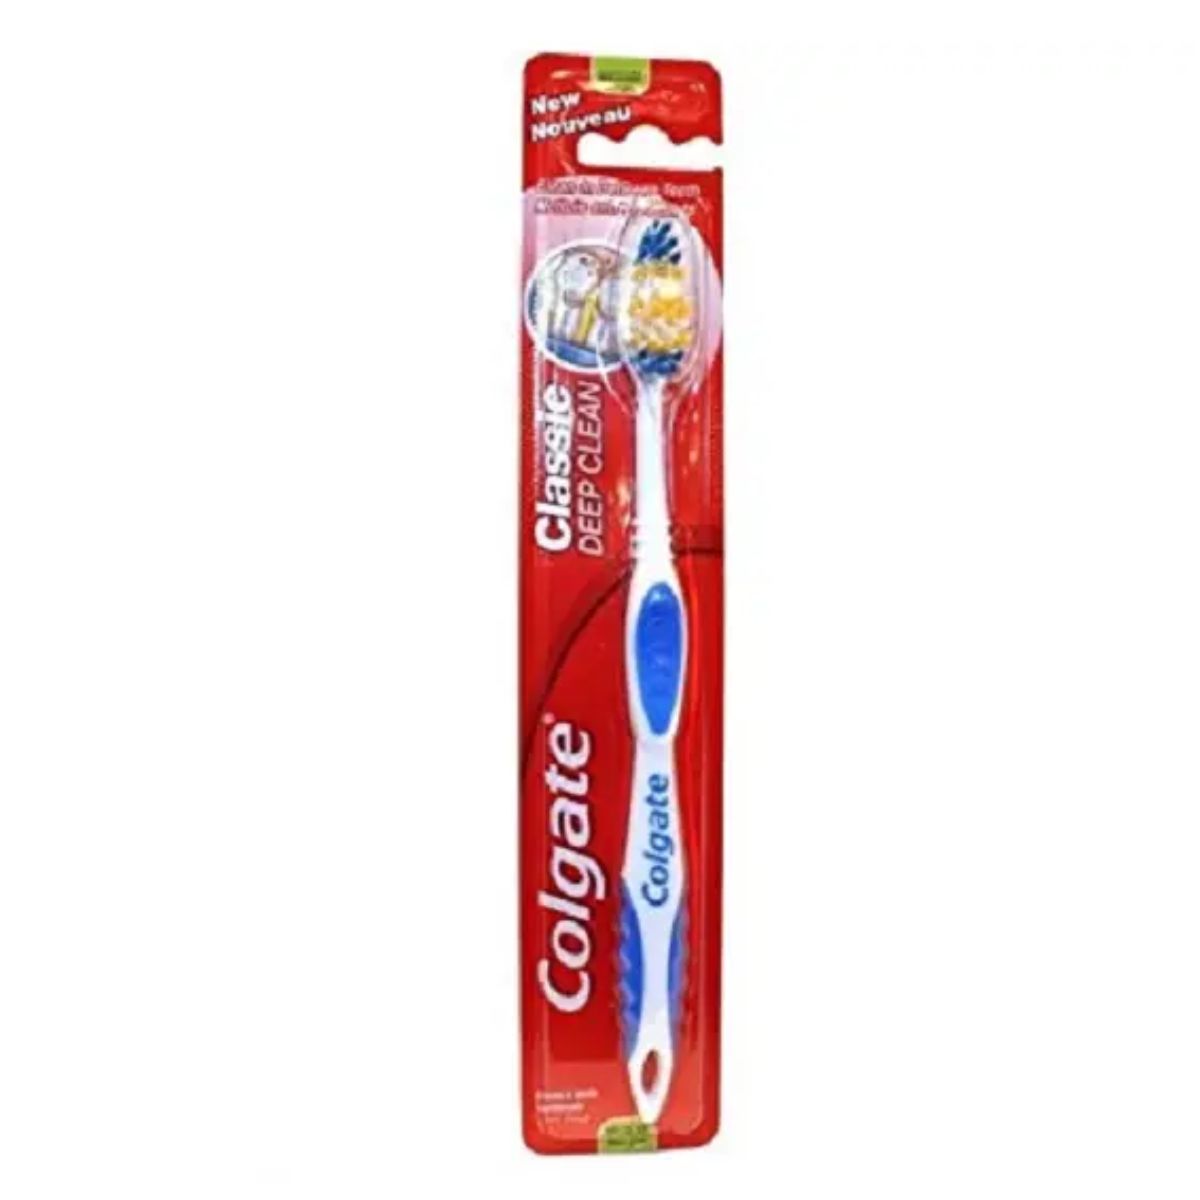 A Colgate - Classic Deep Clean Medium Toothbrush - 1pcs in its packaging.